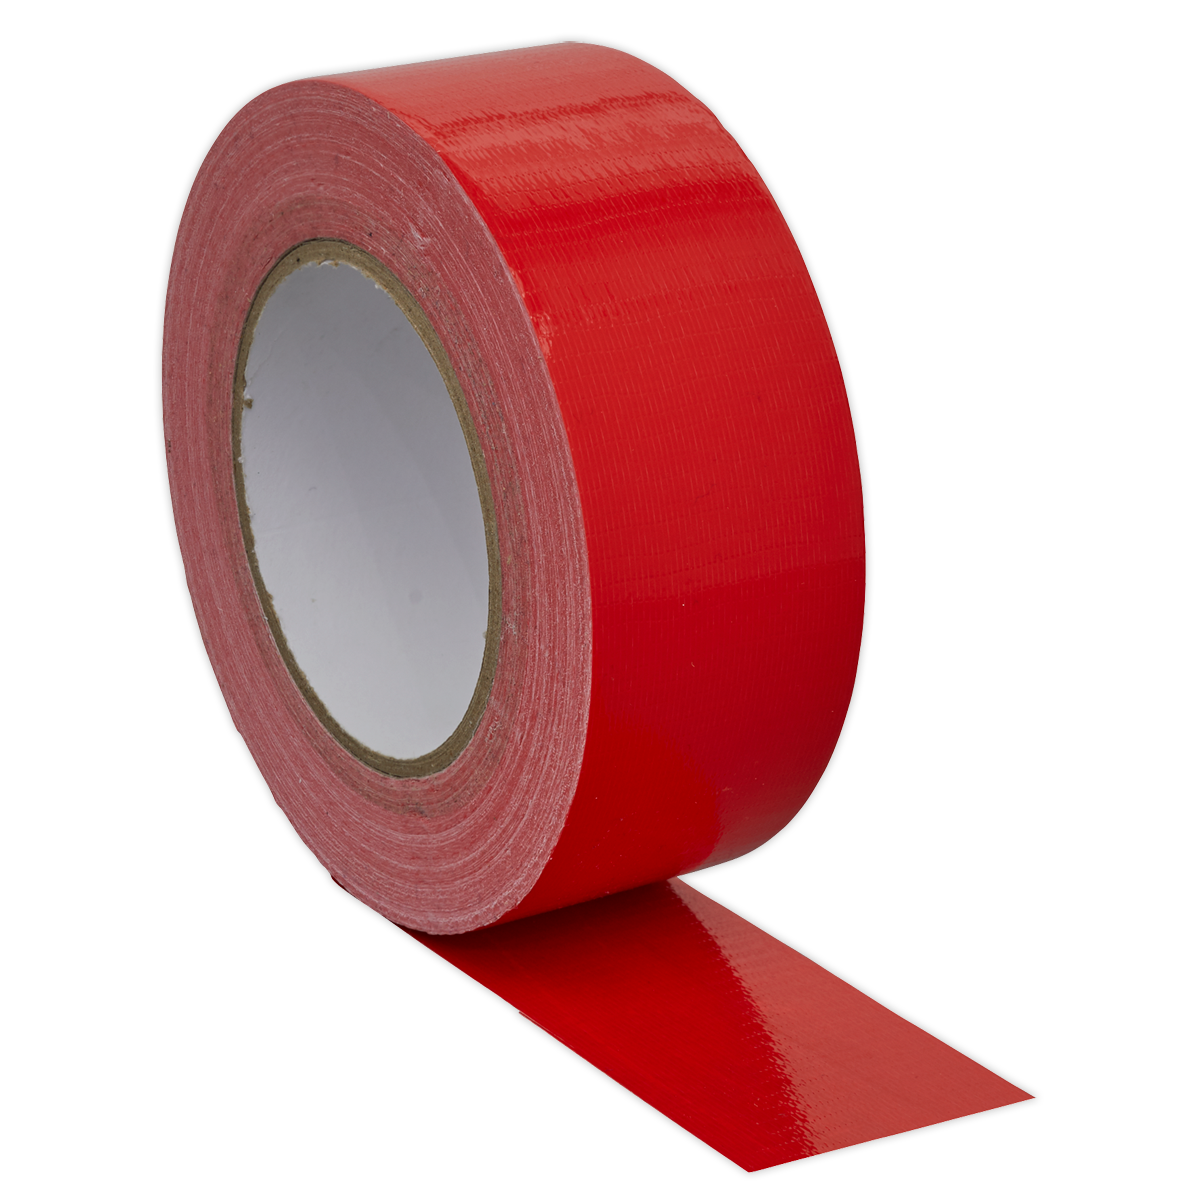 Sealey Duct Tape 50mm x 50m Red